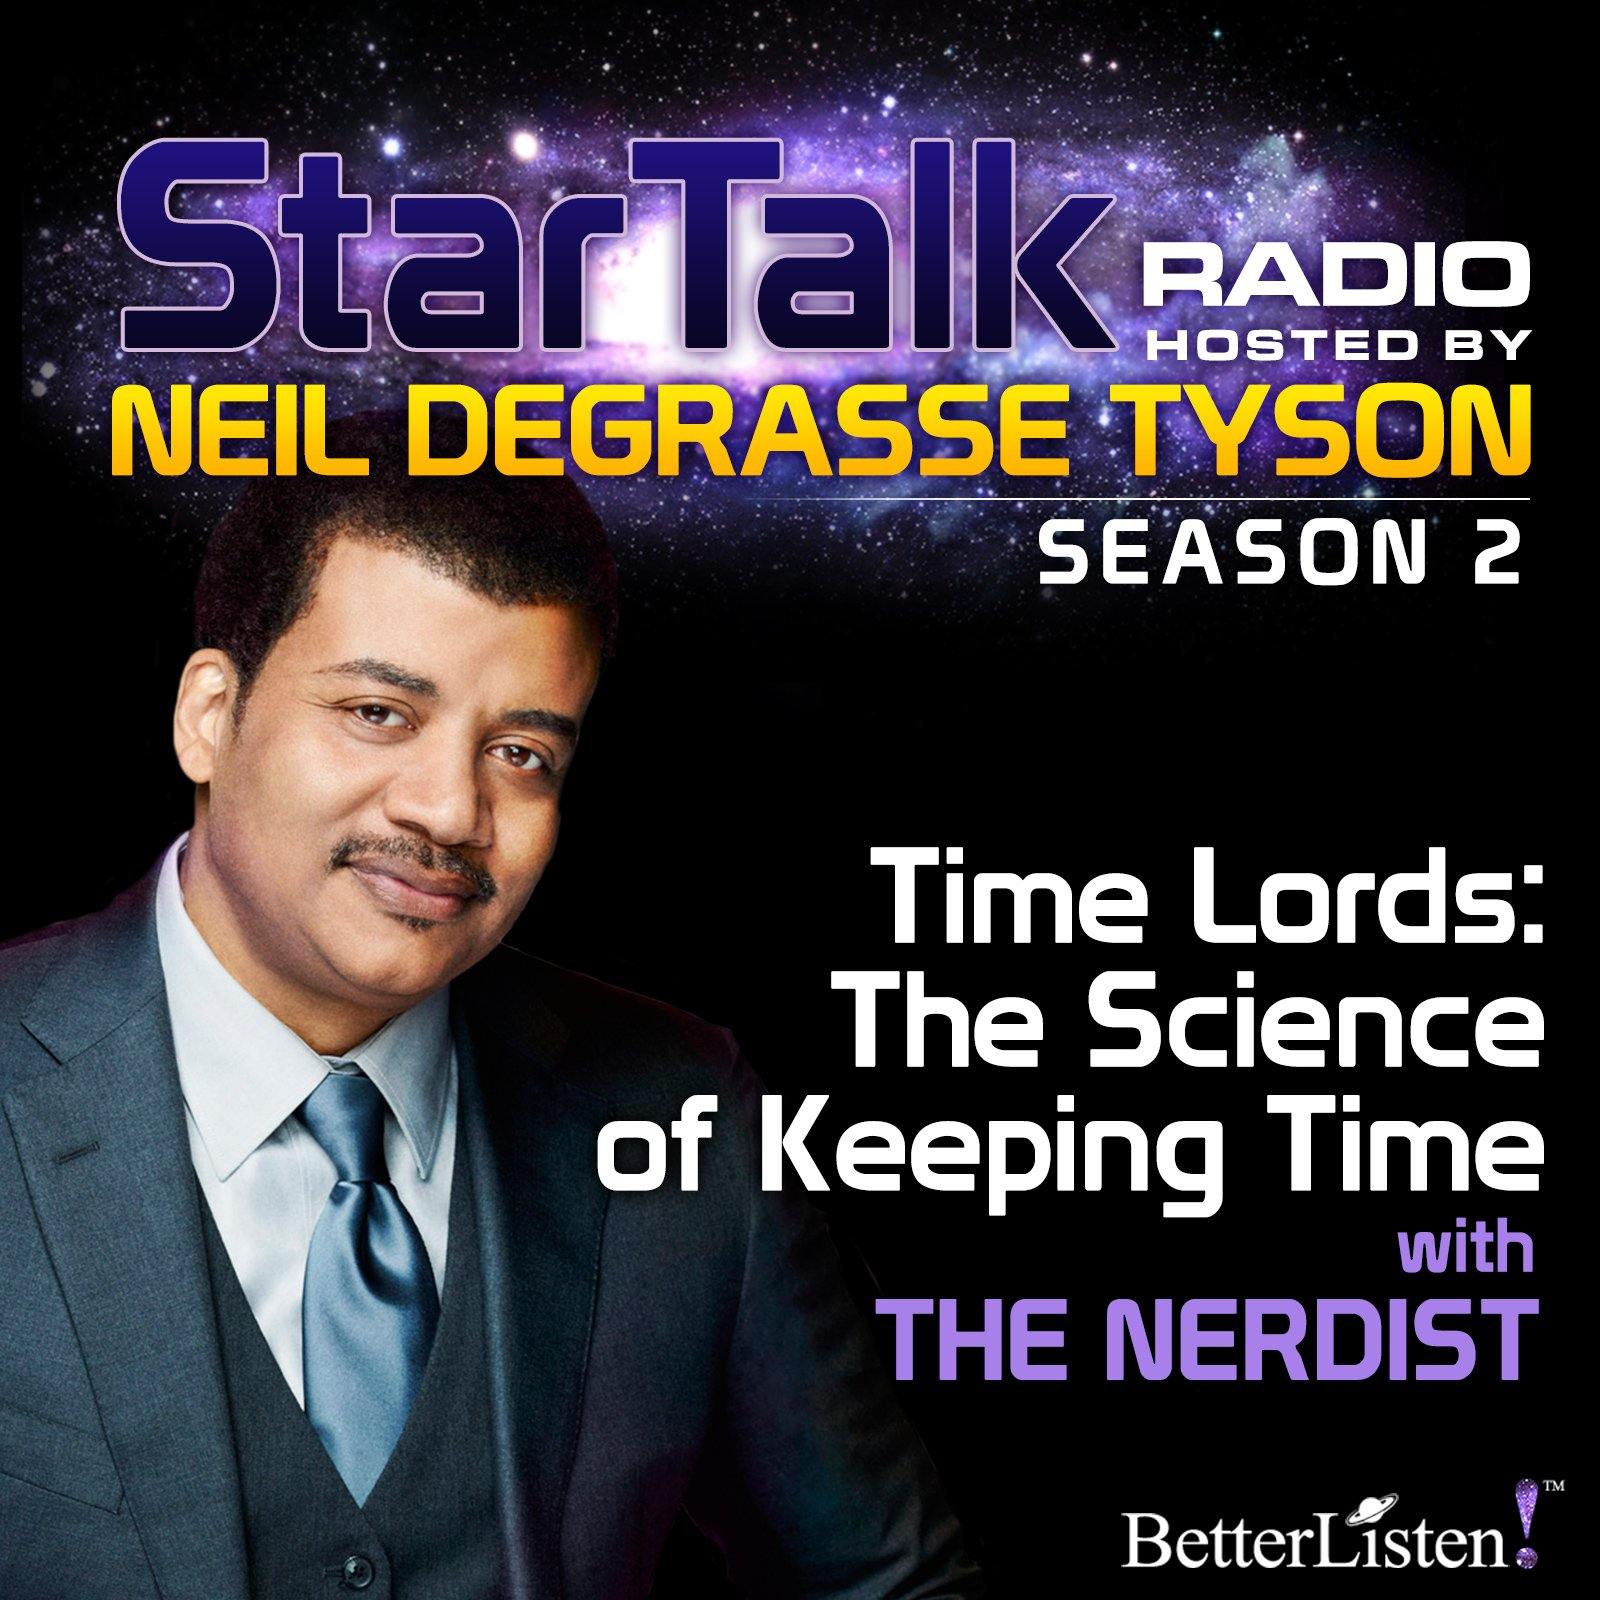 Time Lords: The Science of Keeping Time with Neil deGrasse Tyson Audio Program StarTalk - BetterListen!